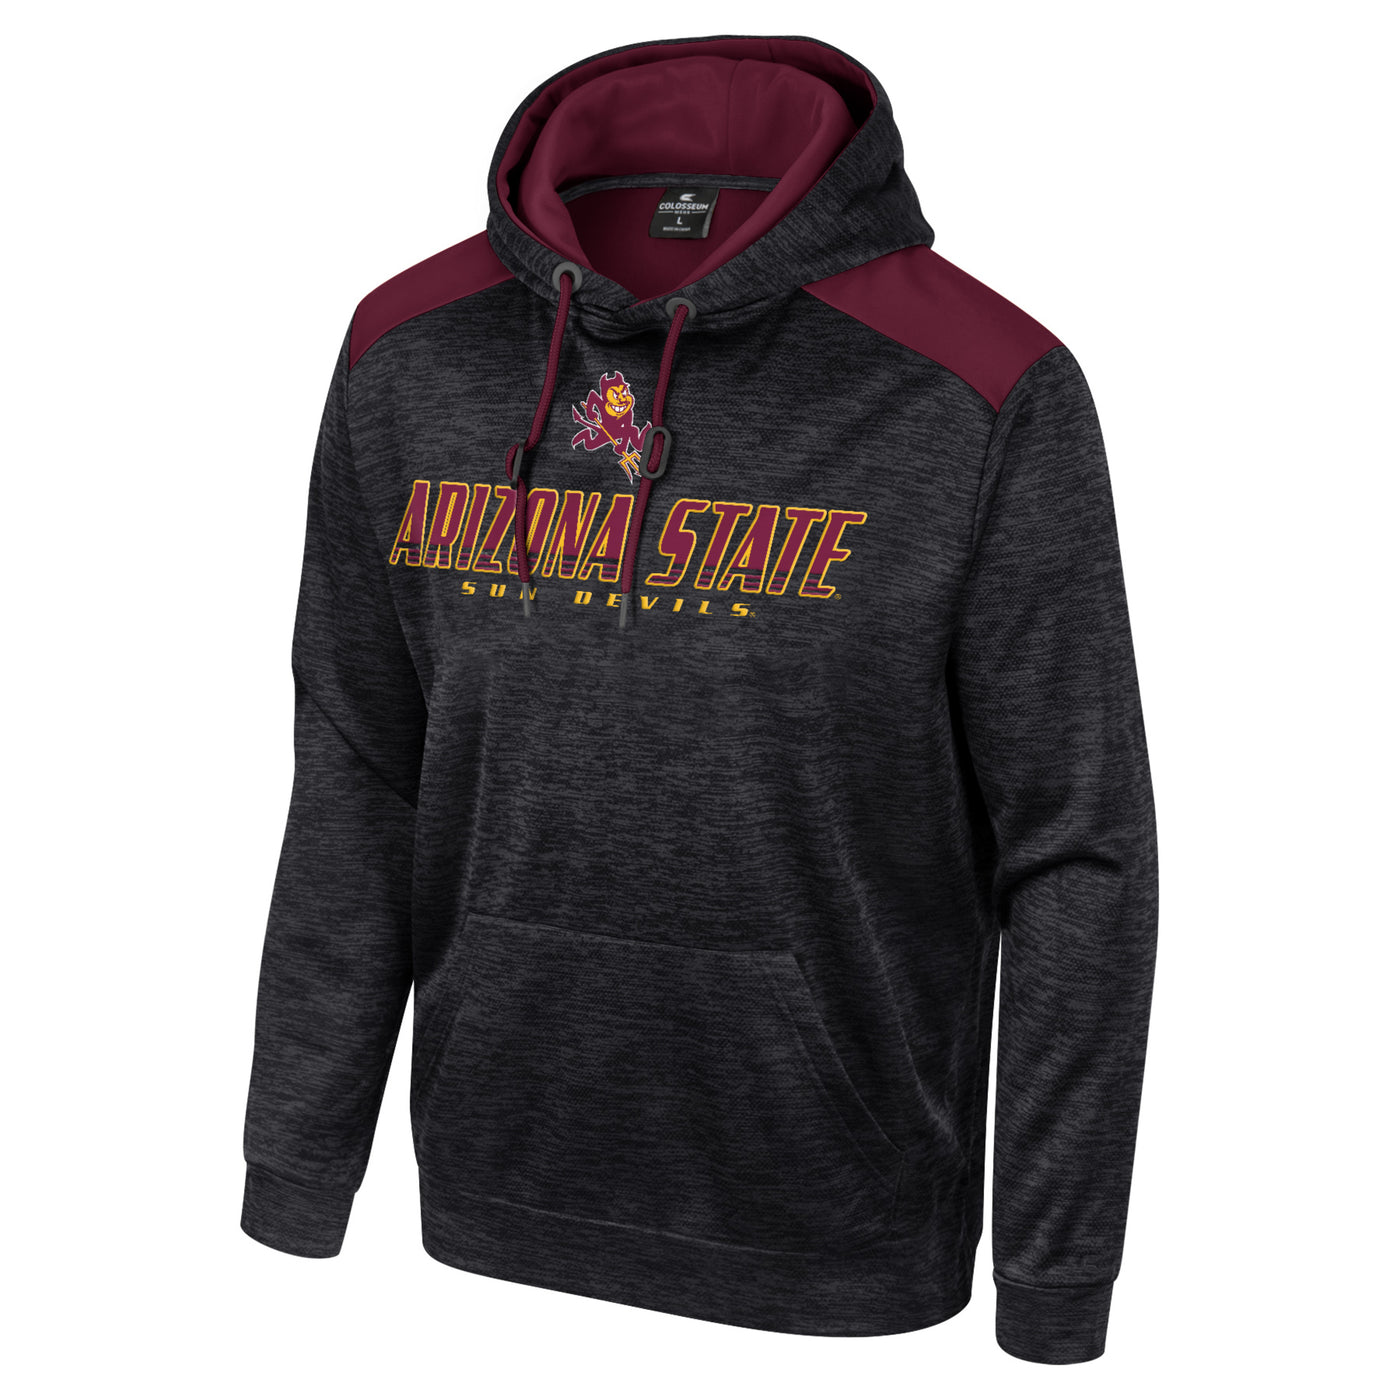 ASU hoodie in a black and grey static color. there is maroon on the shoulders and lining the hood. The text 